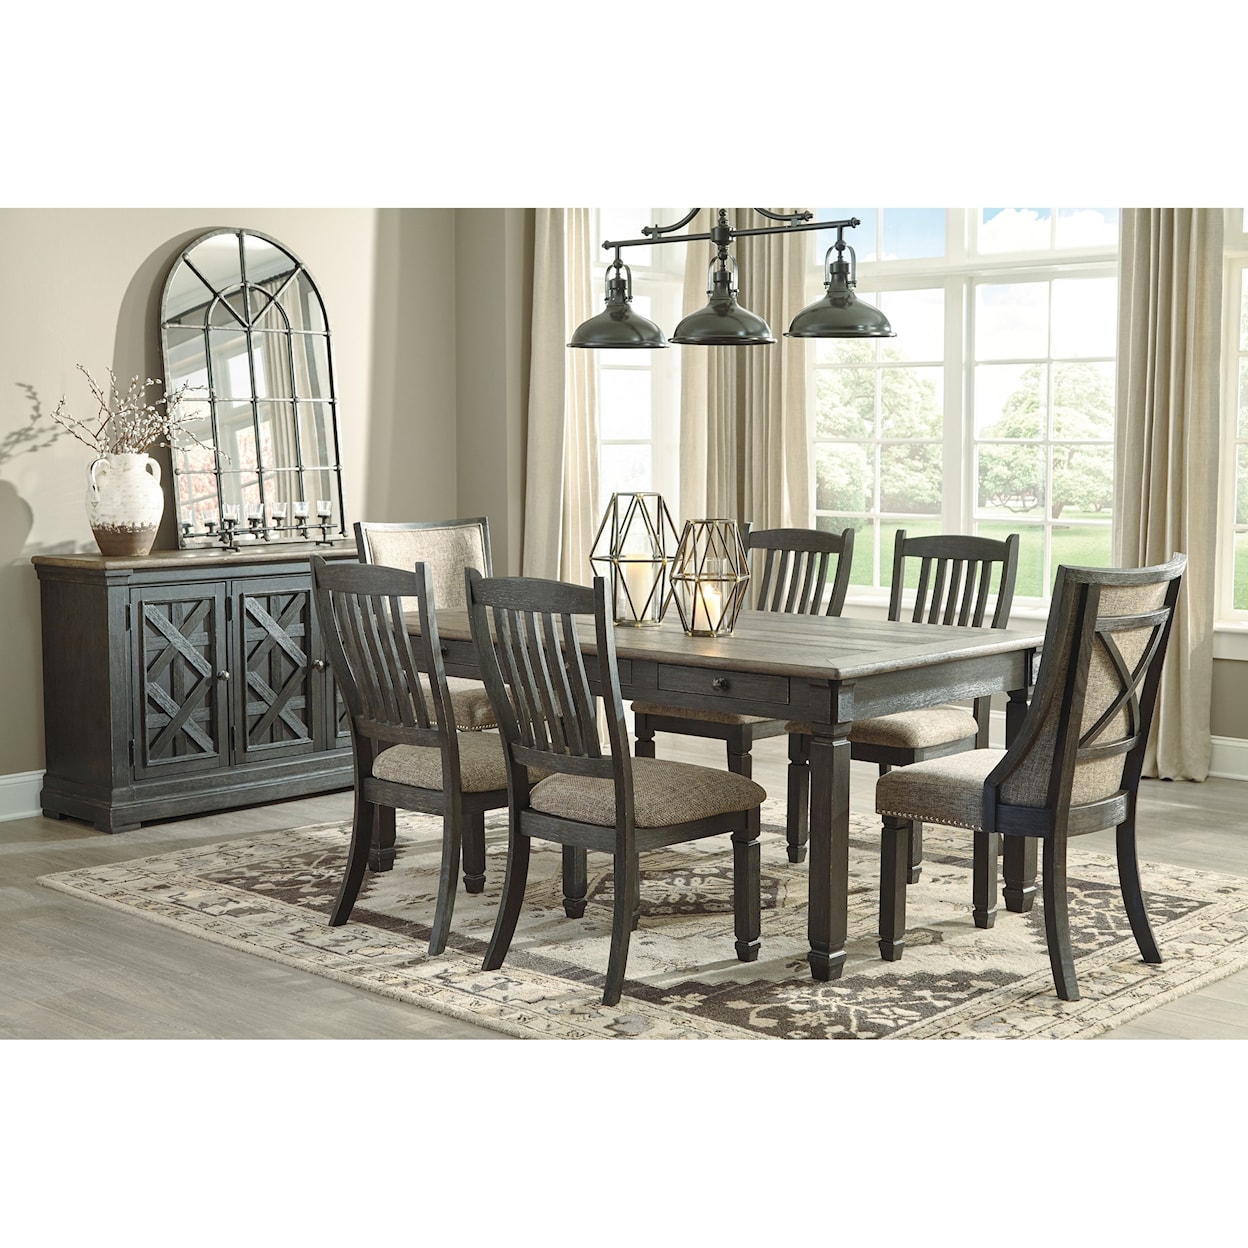 Signature Design by Ashley Tyler Creek Formal Dining Room Group